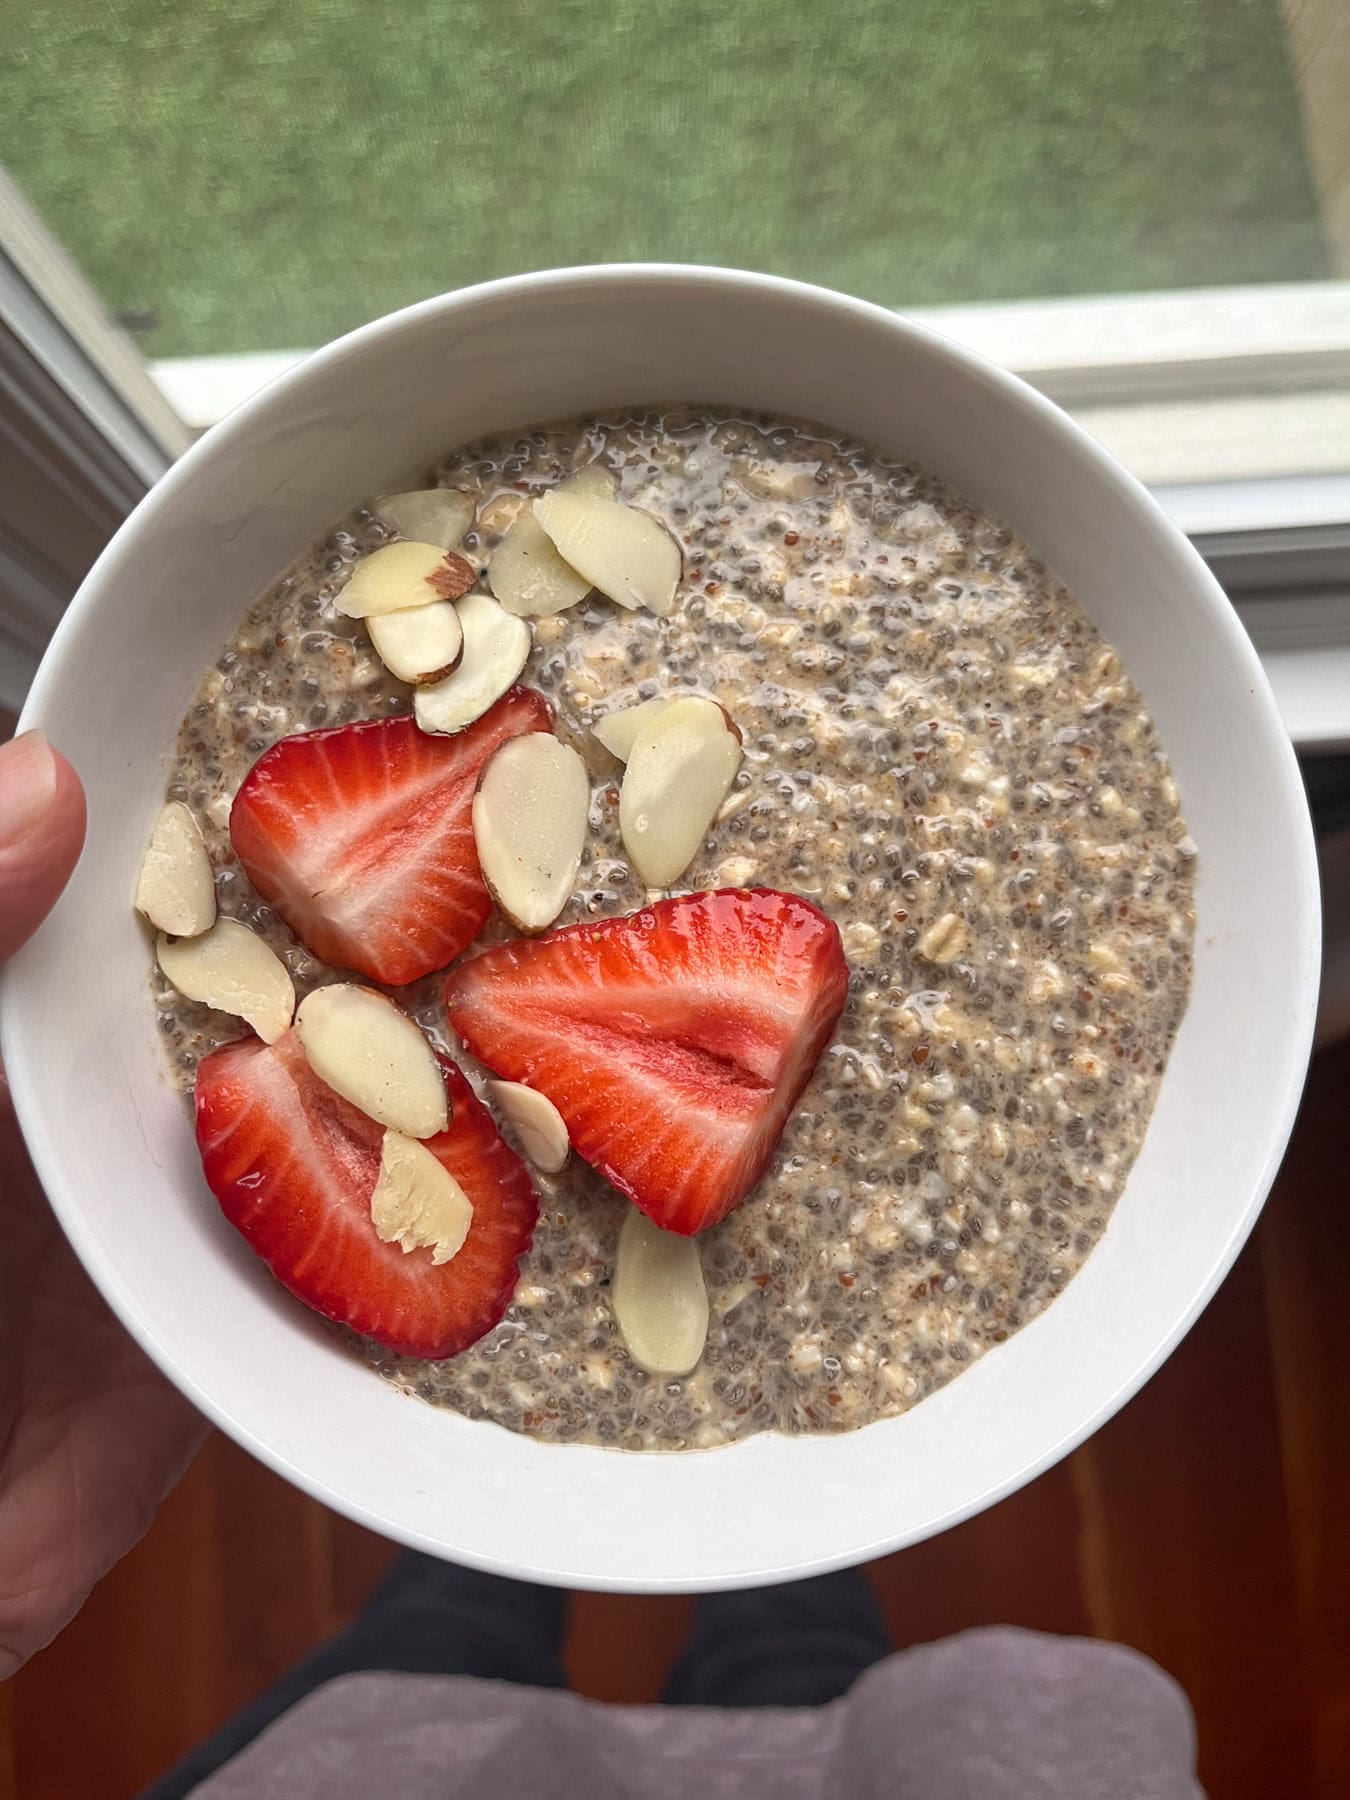 overnight oats and chia pudding combined